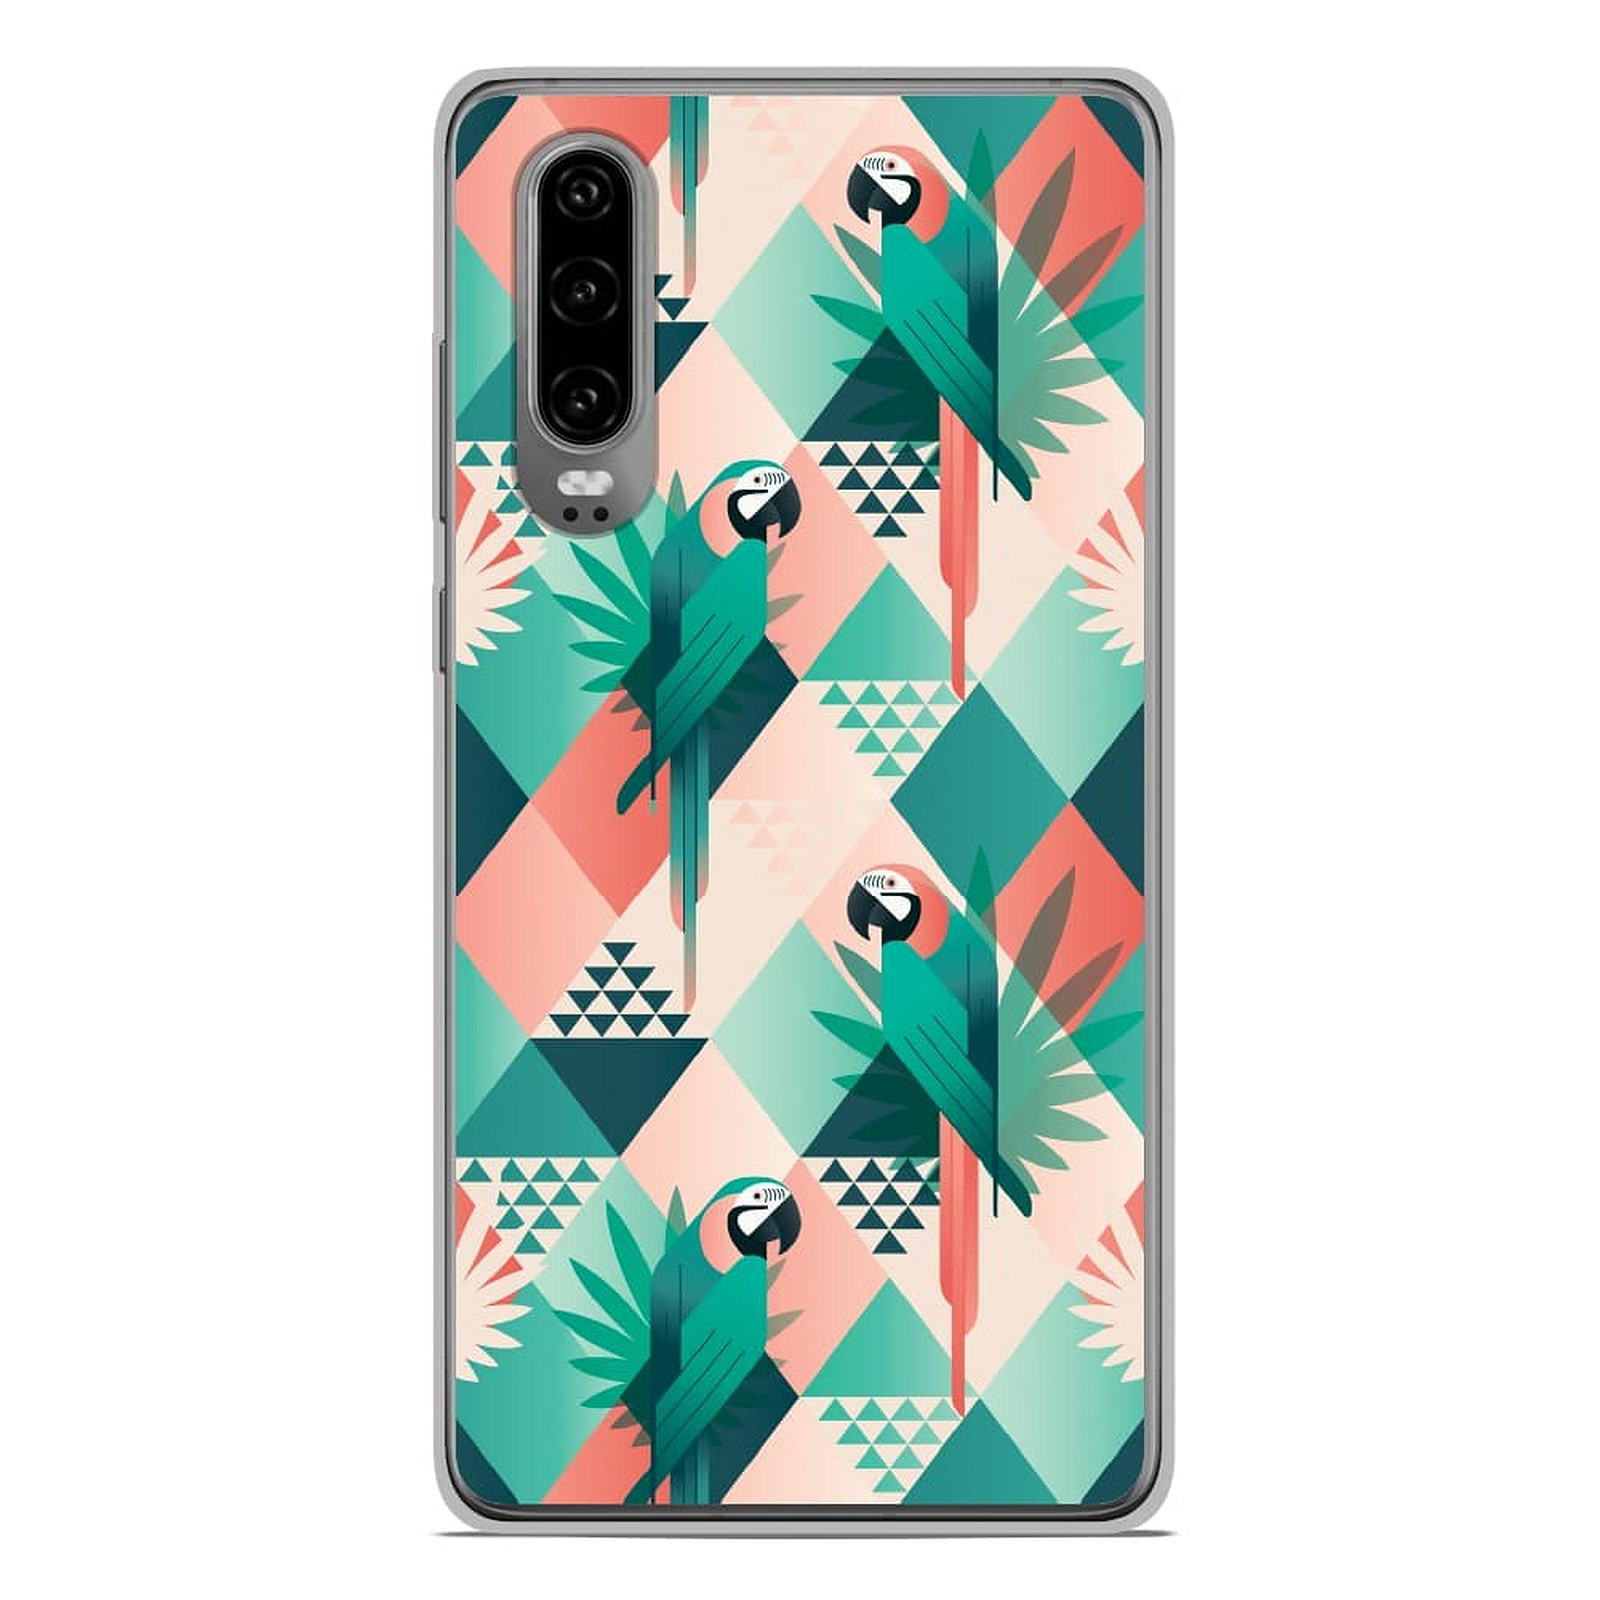 1001 Coques Coque silicone gel Huawei P30 motif Perroquet ge´ome´trique - Coque telephone 1001Coques